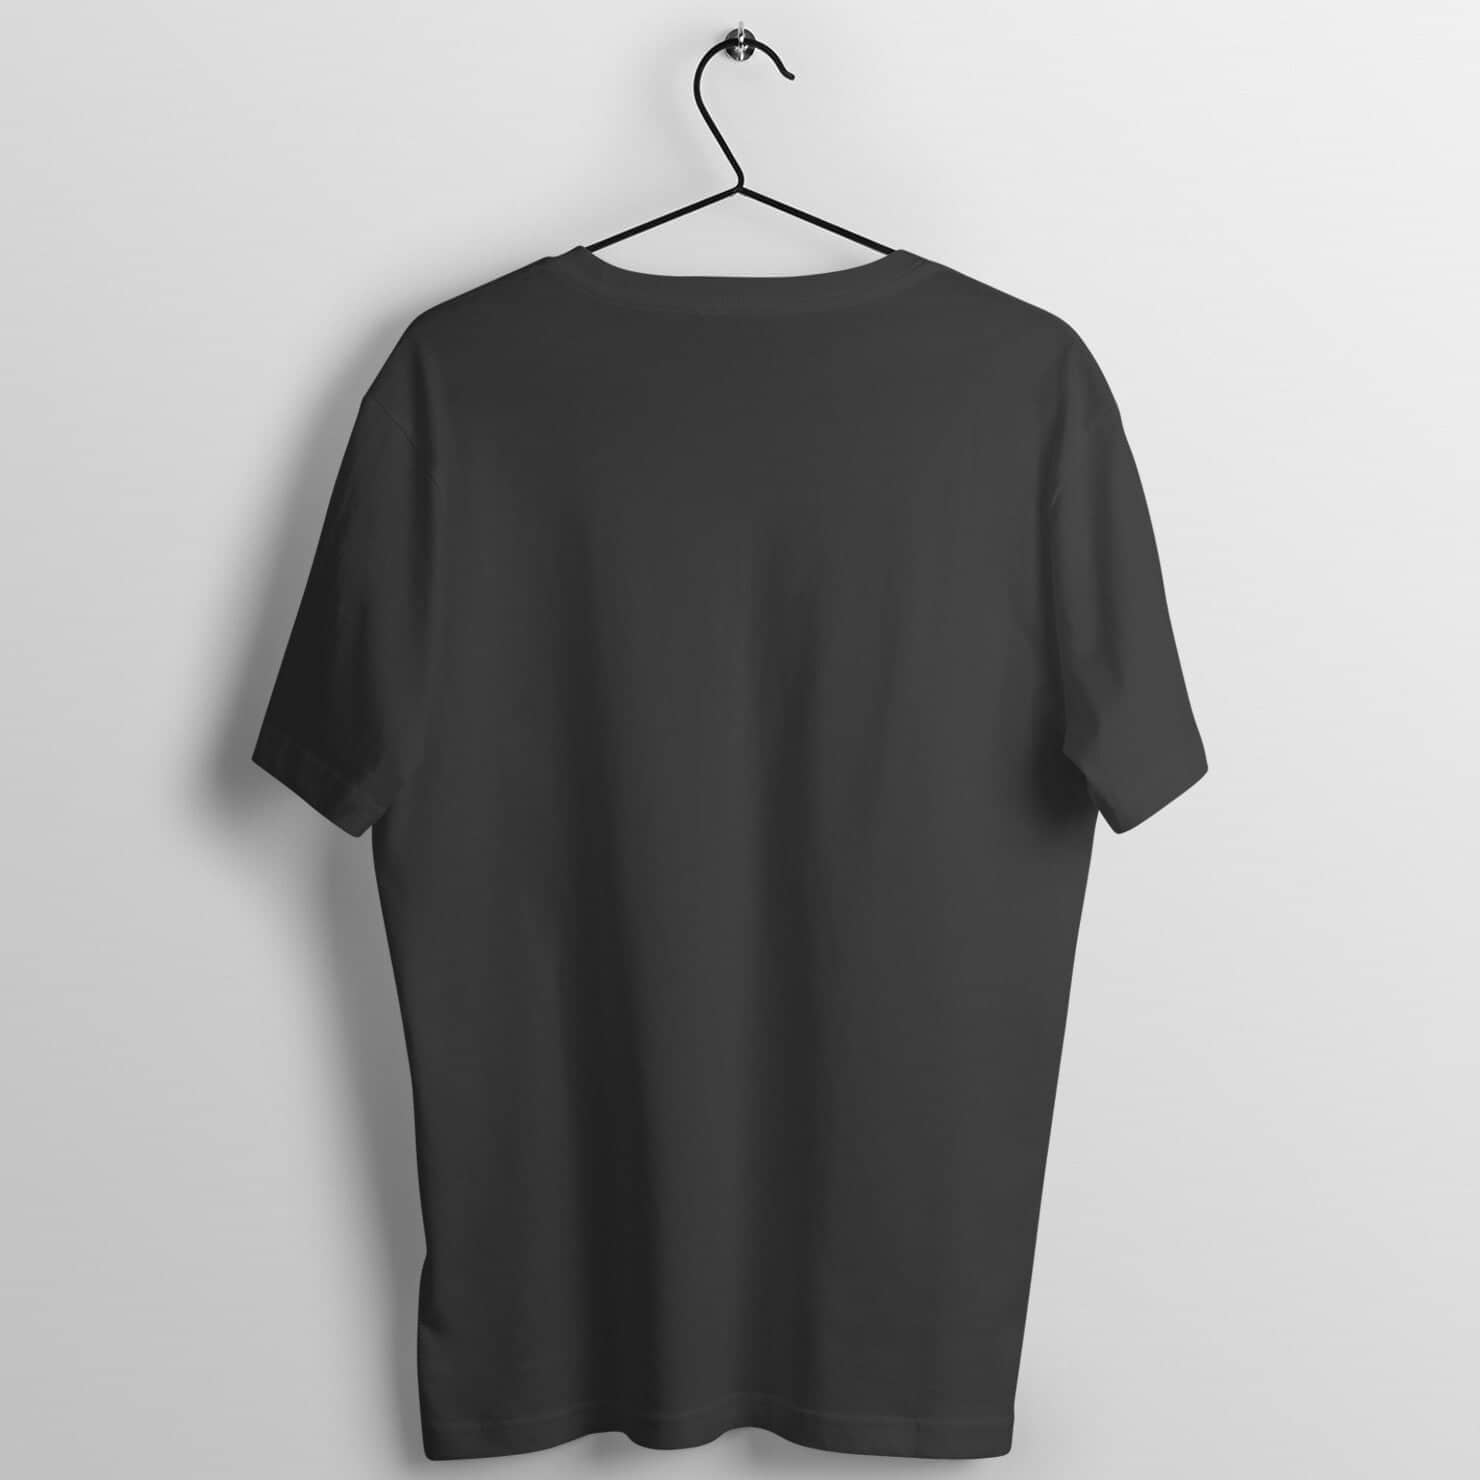 Wow Exclusive Black T Shirt for Men and Women Printrove 